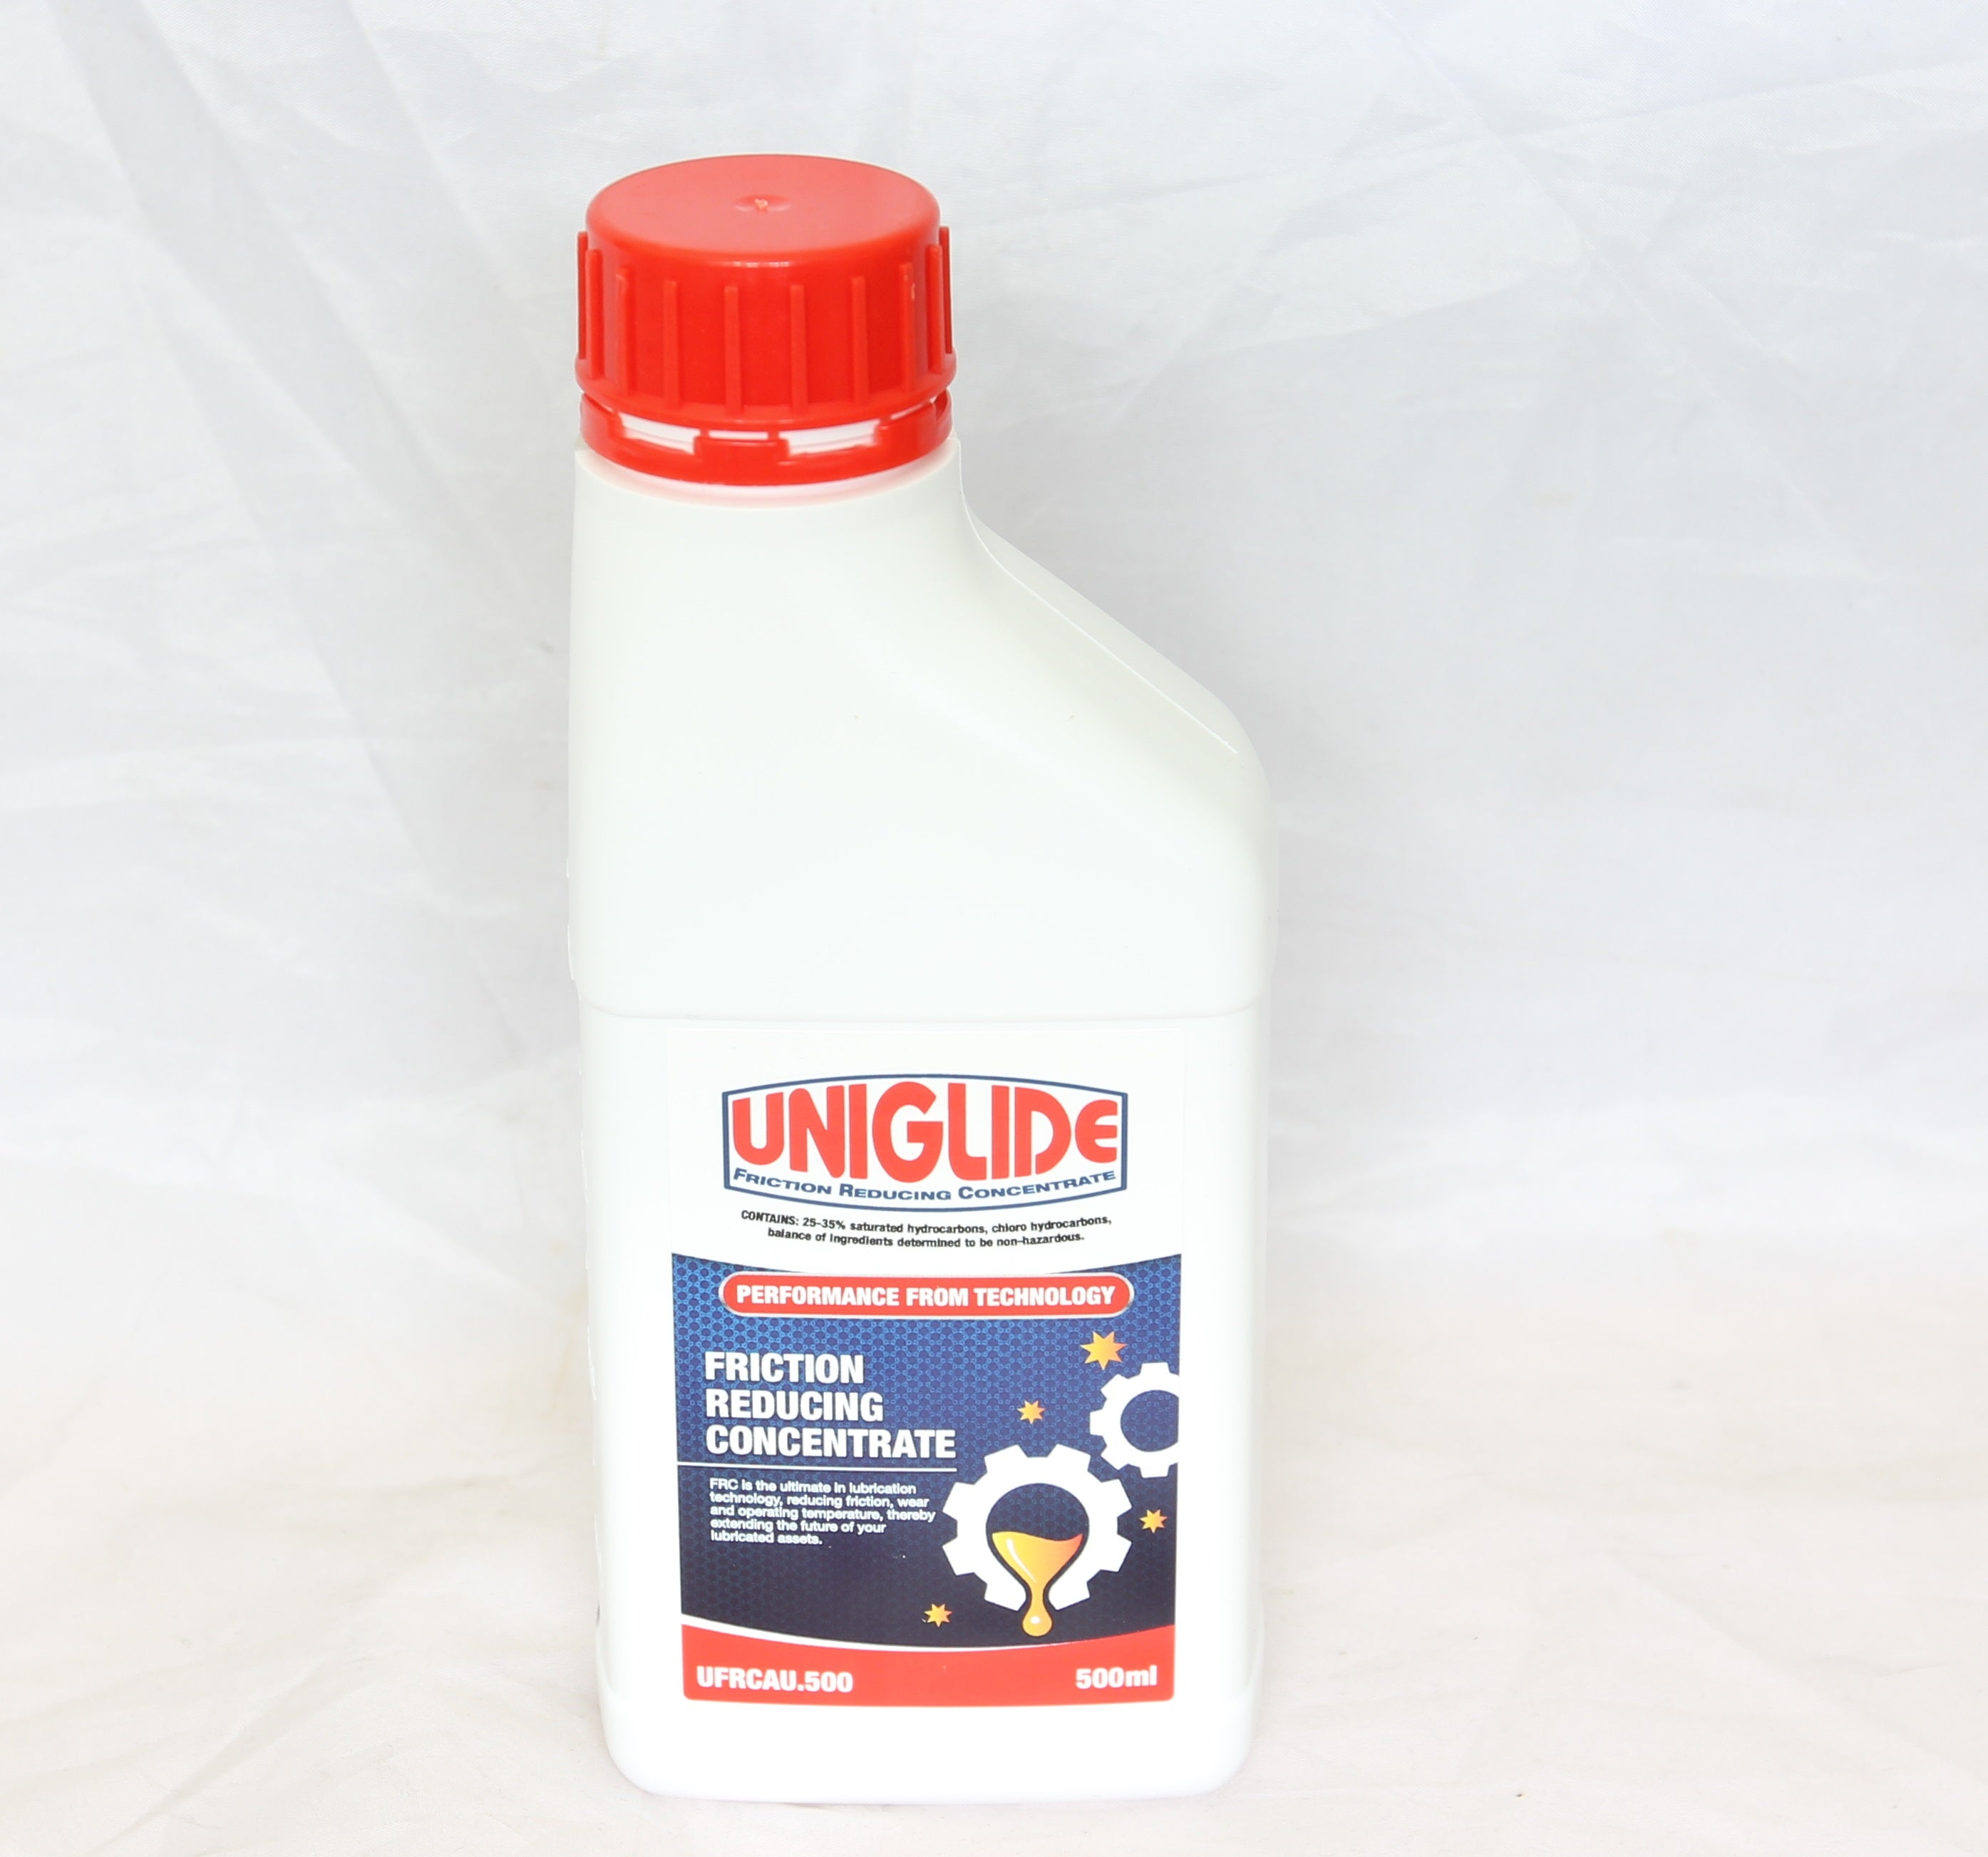 Uniglide Friction Reducing Concentrate - 1 Carton (12 x 500ml) | Performance Lubricants Australia